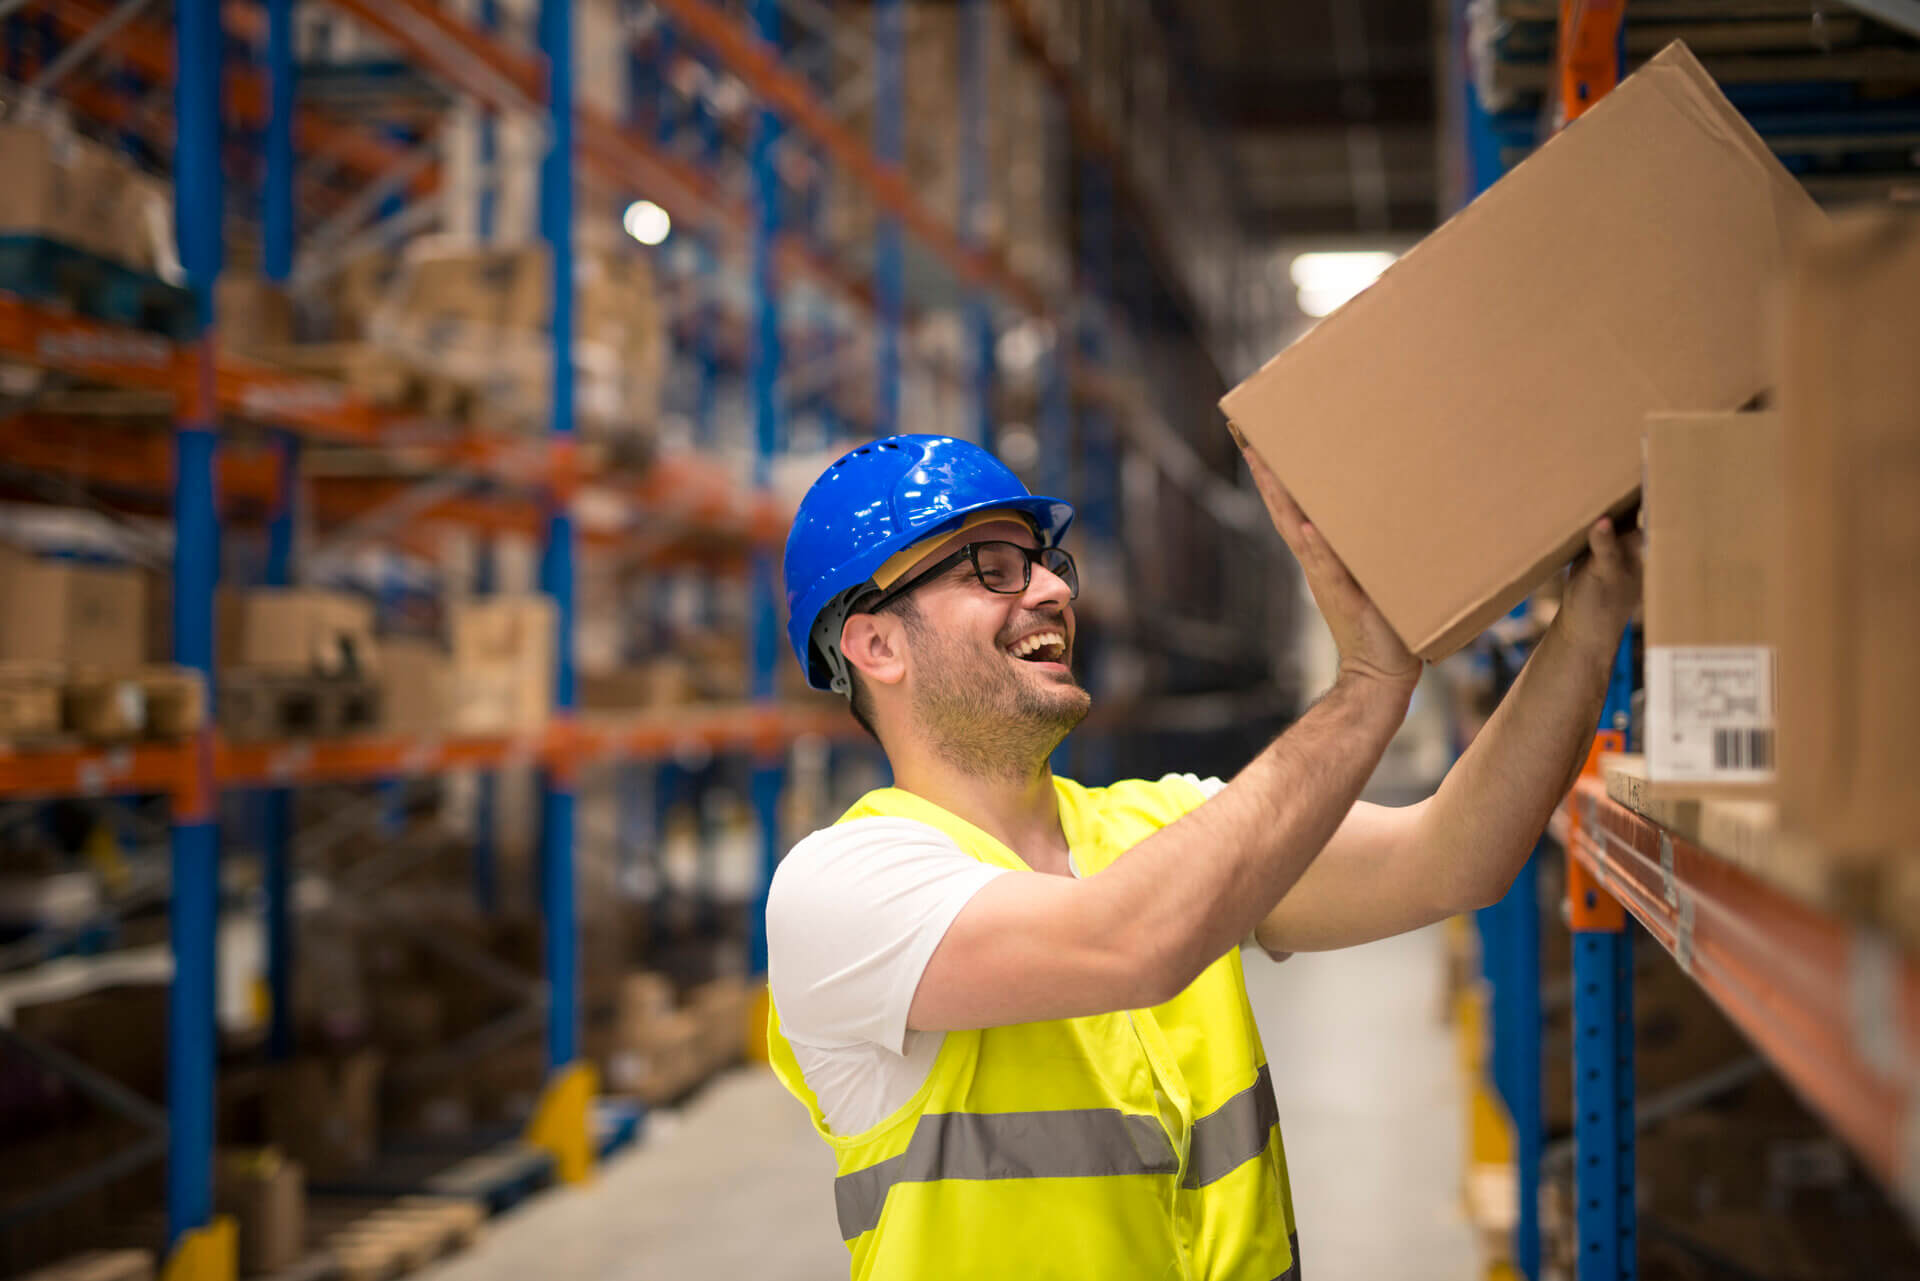 Worker stacking shelves in a warehouse safely and pain free with a smile on his face